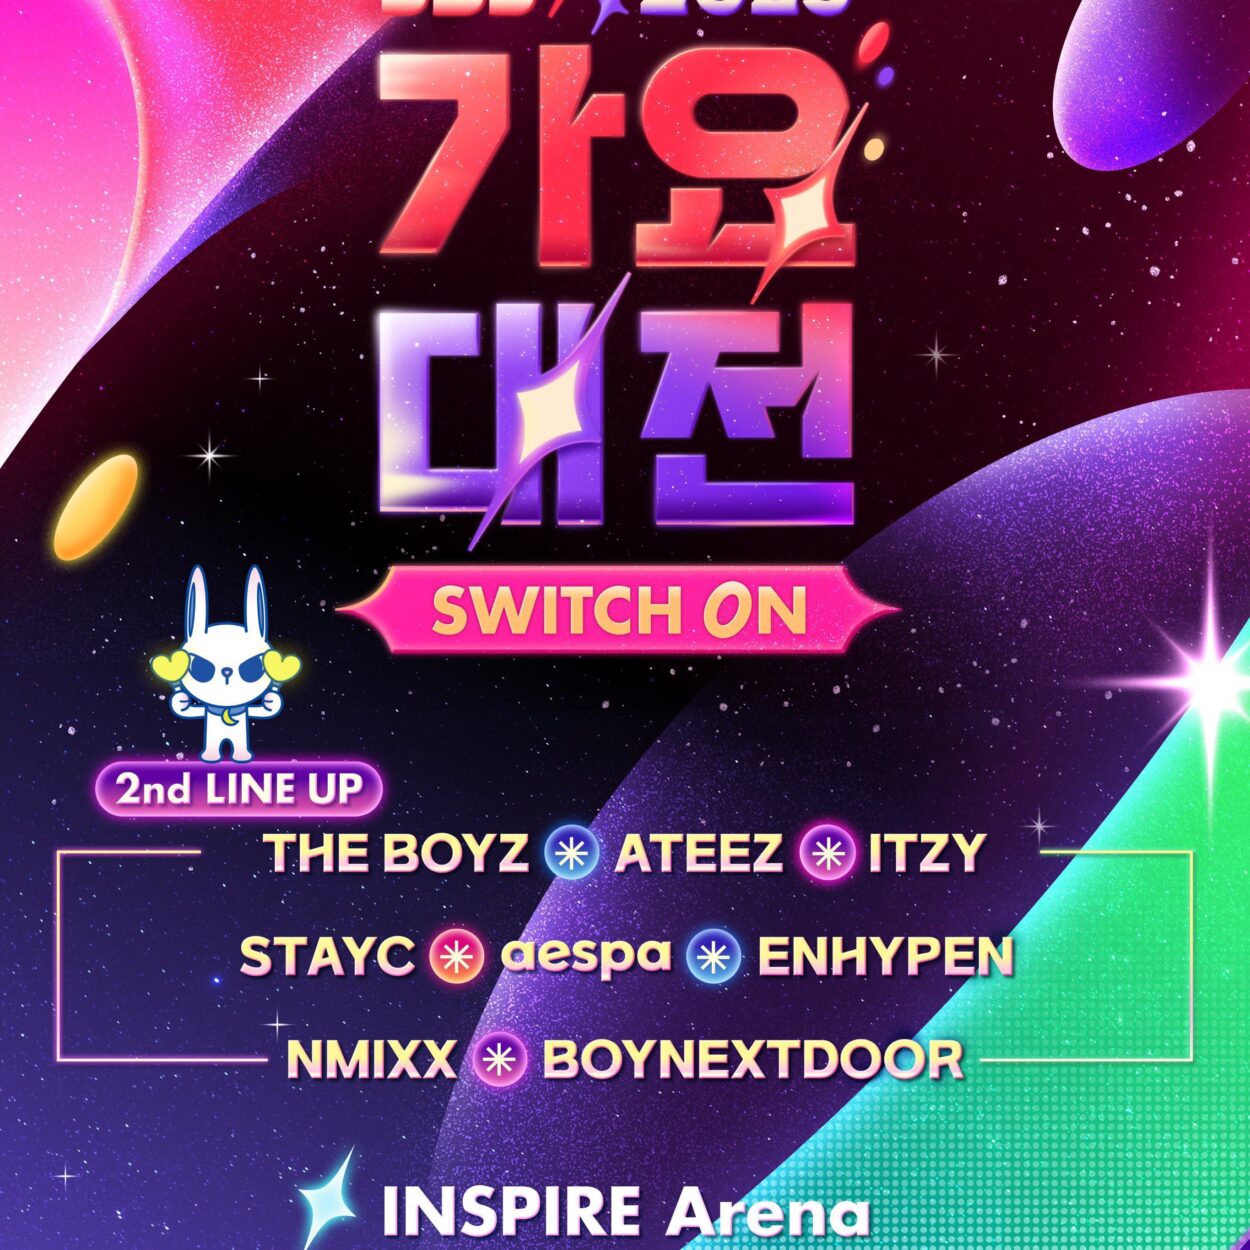 231120 ENHYPEN is part of the line up for '2023 SBS Gayo Daejeon' on December 25